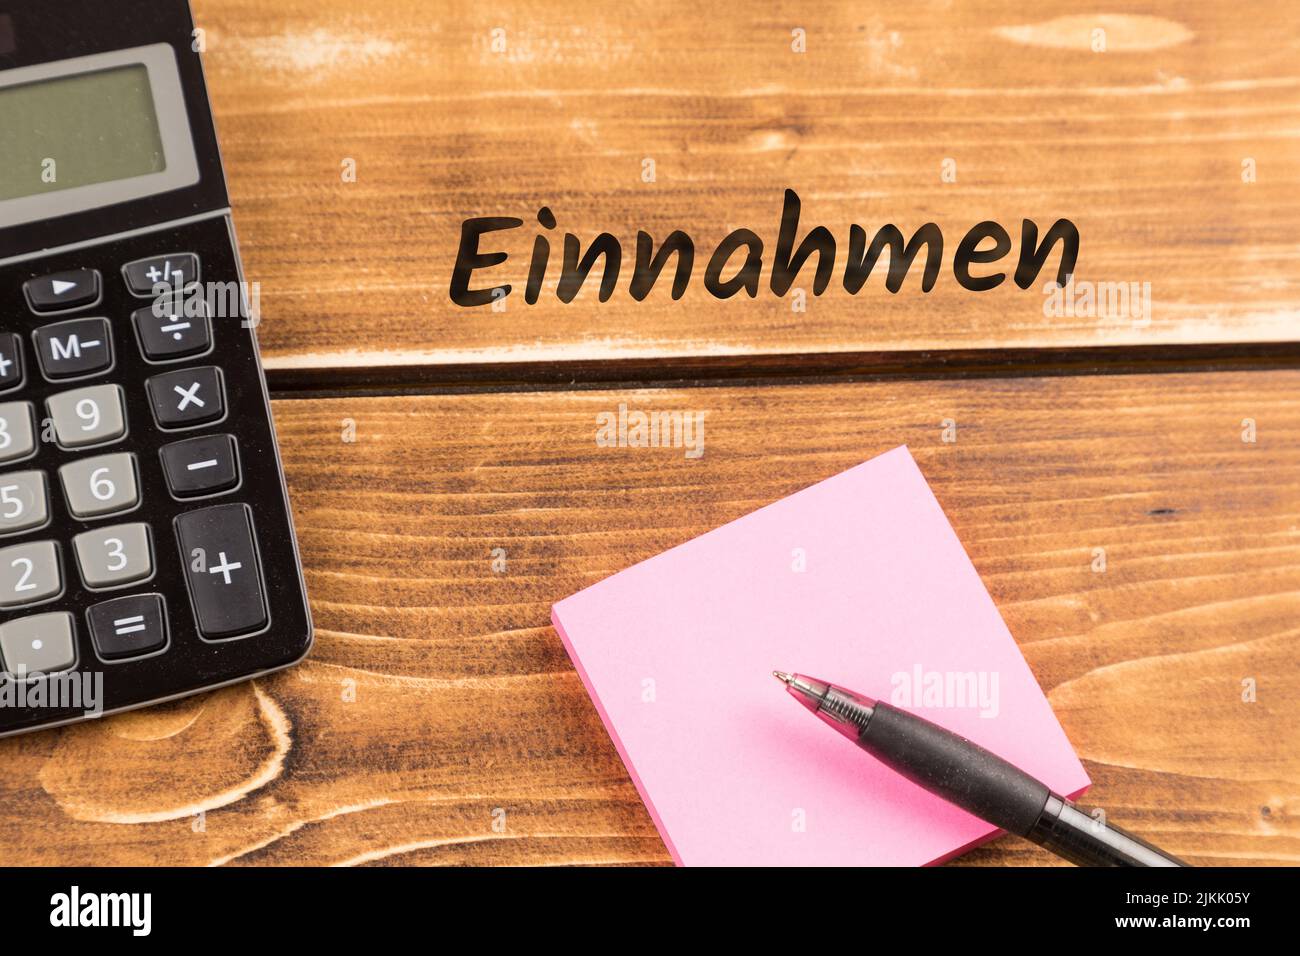 business desk with paper, pen and calculator with german text Einnahmen, in english revenue Stock Photo